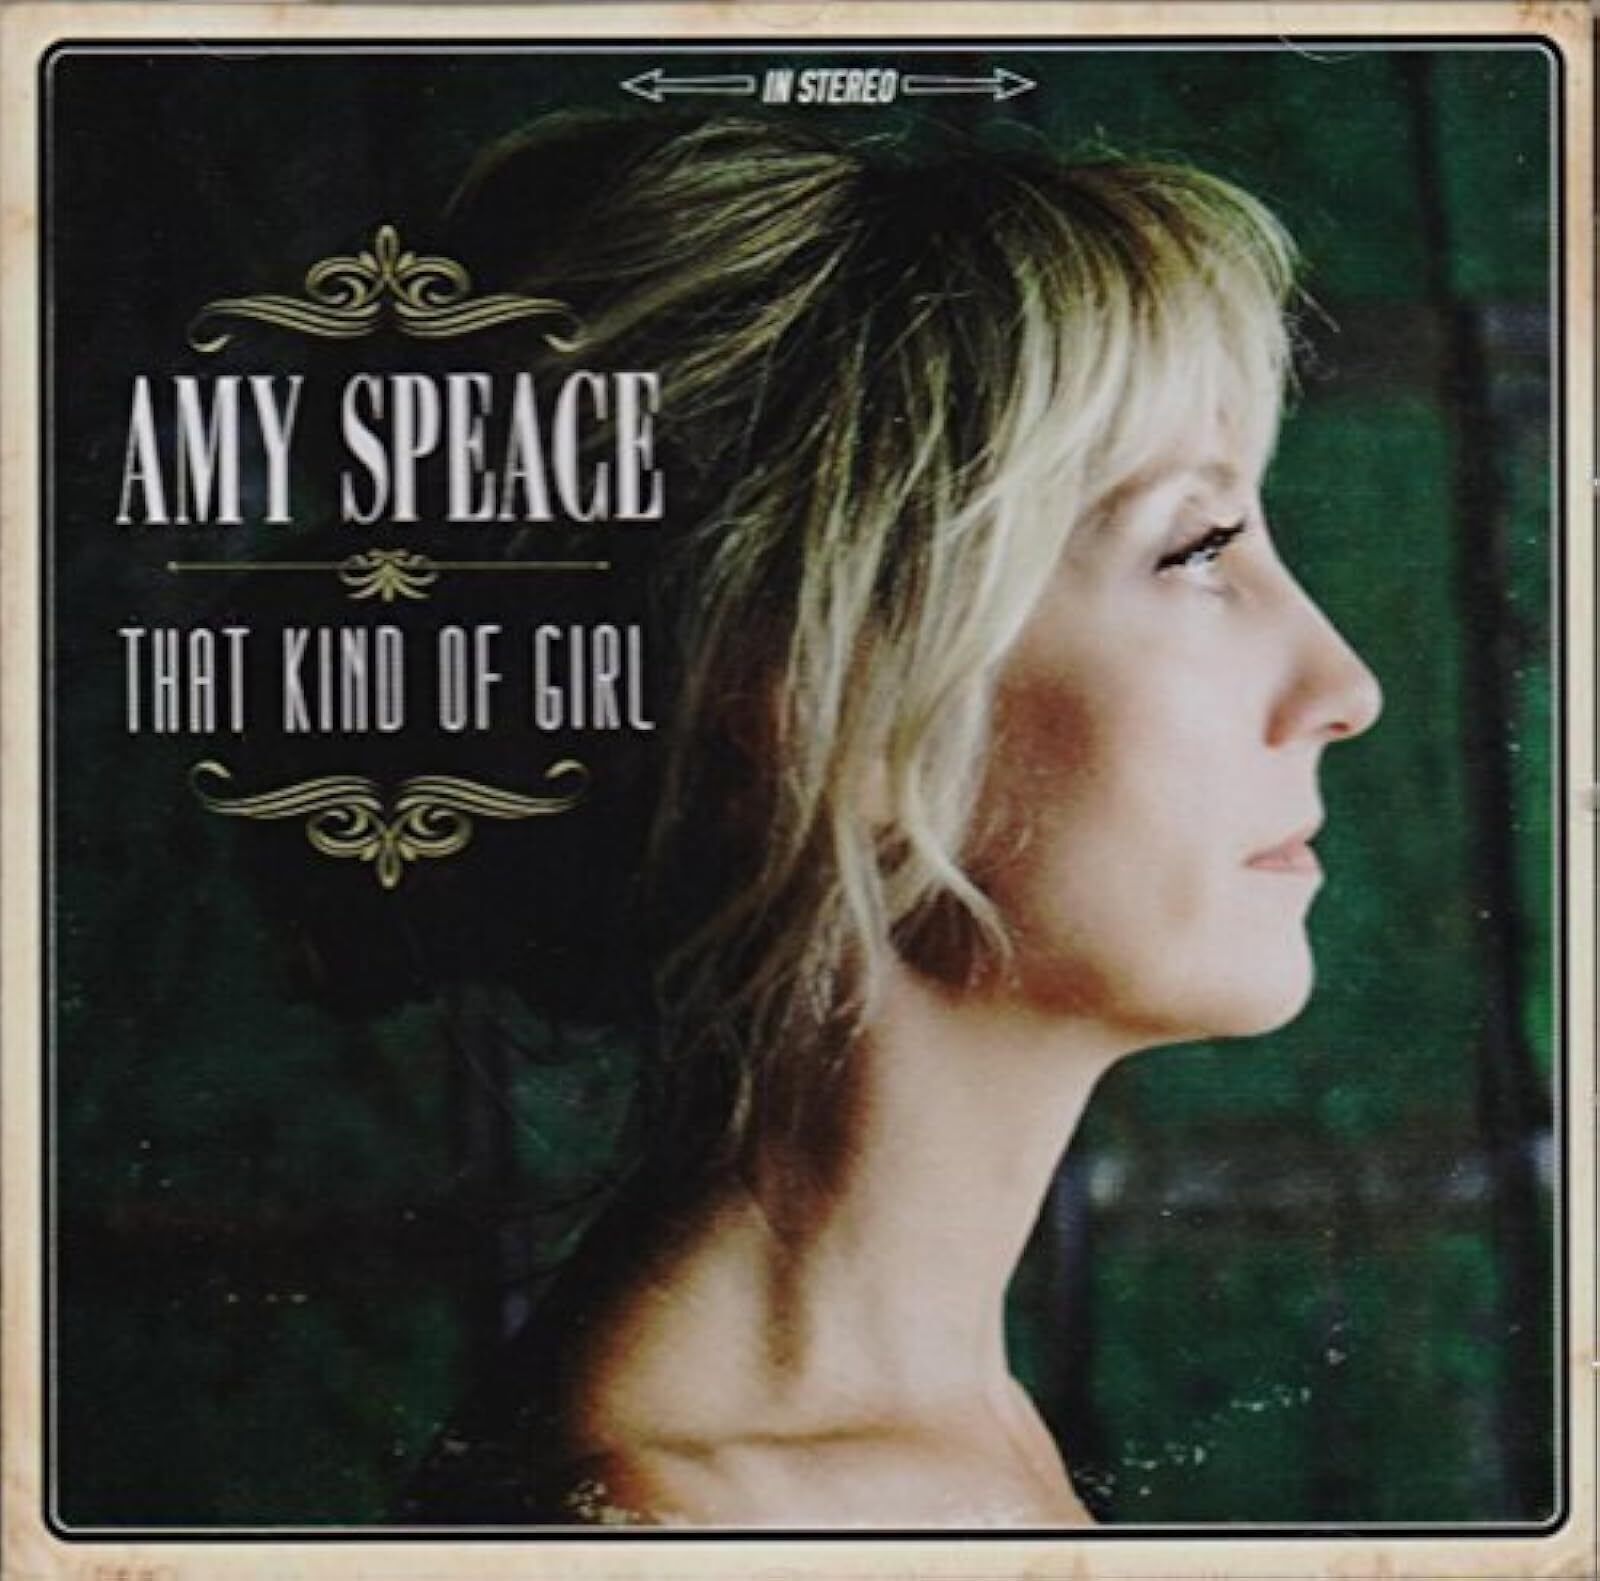 That Kind Of Girl By Amy Speace On Audio CD Album Very Good